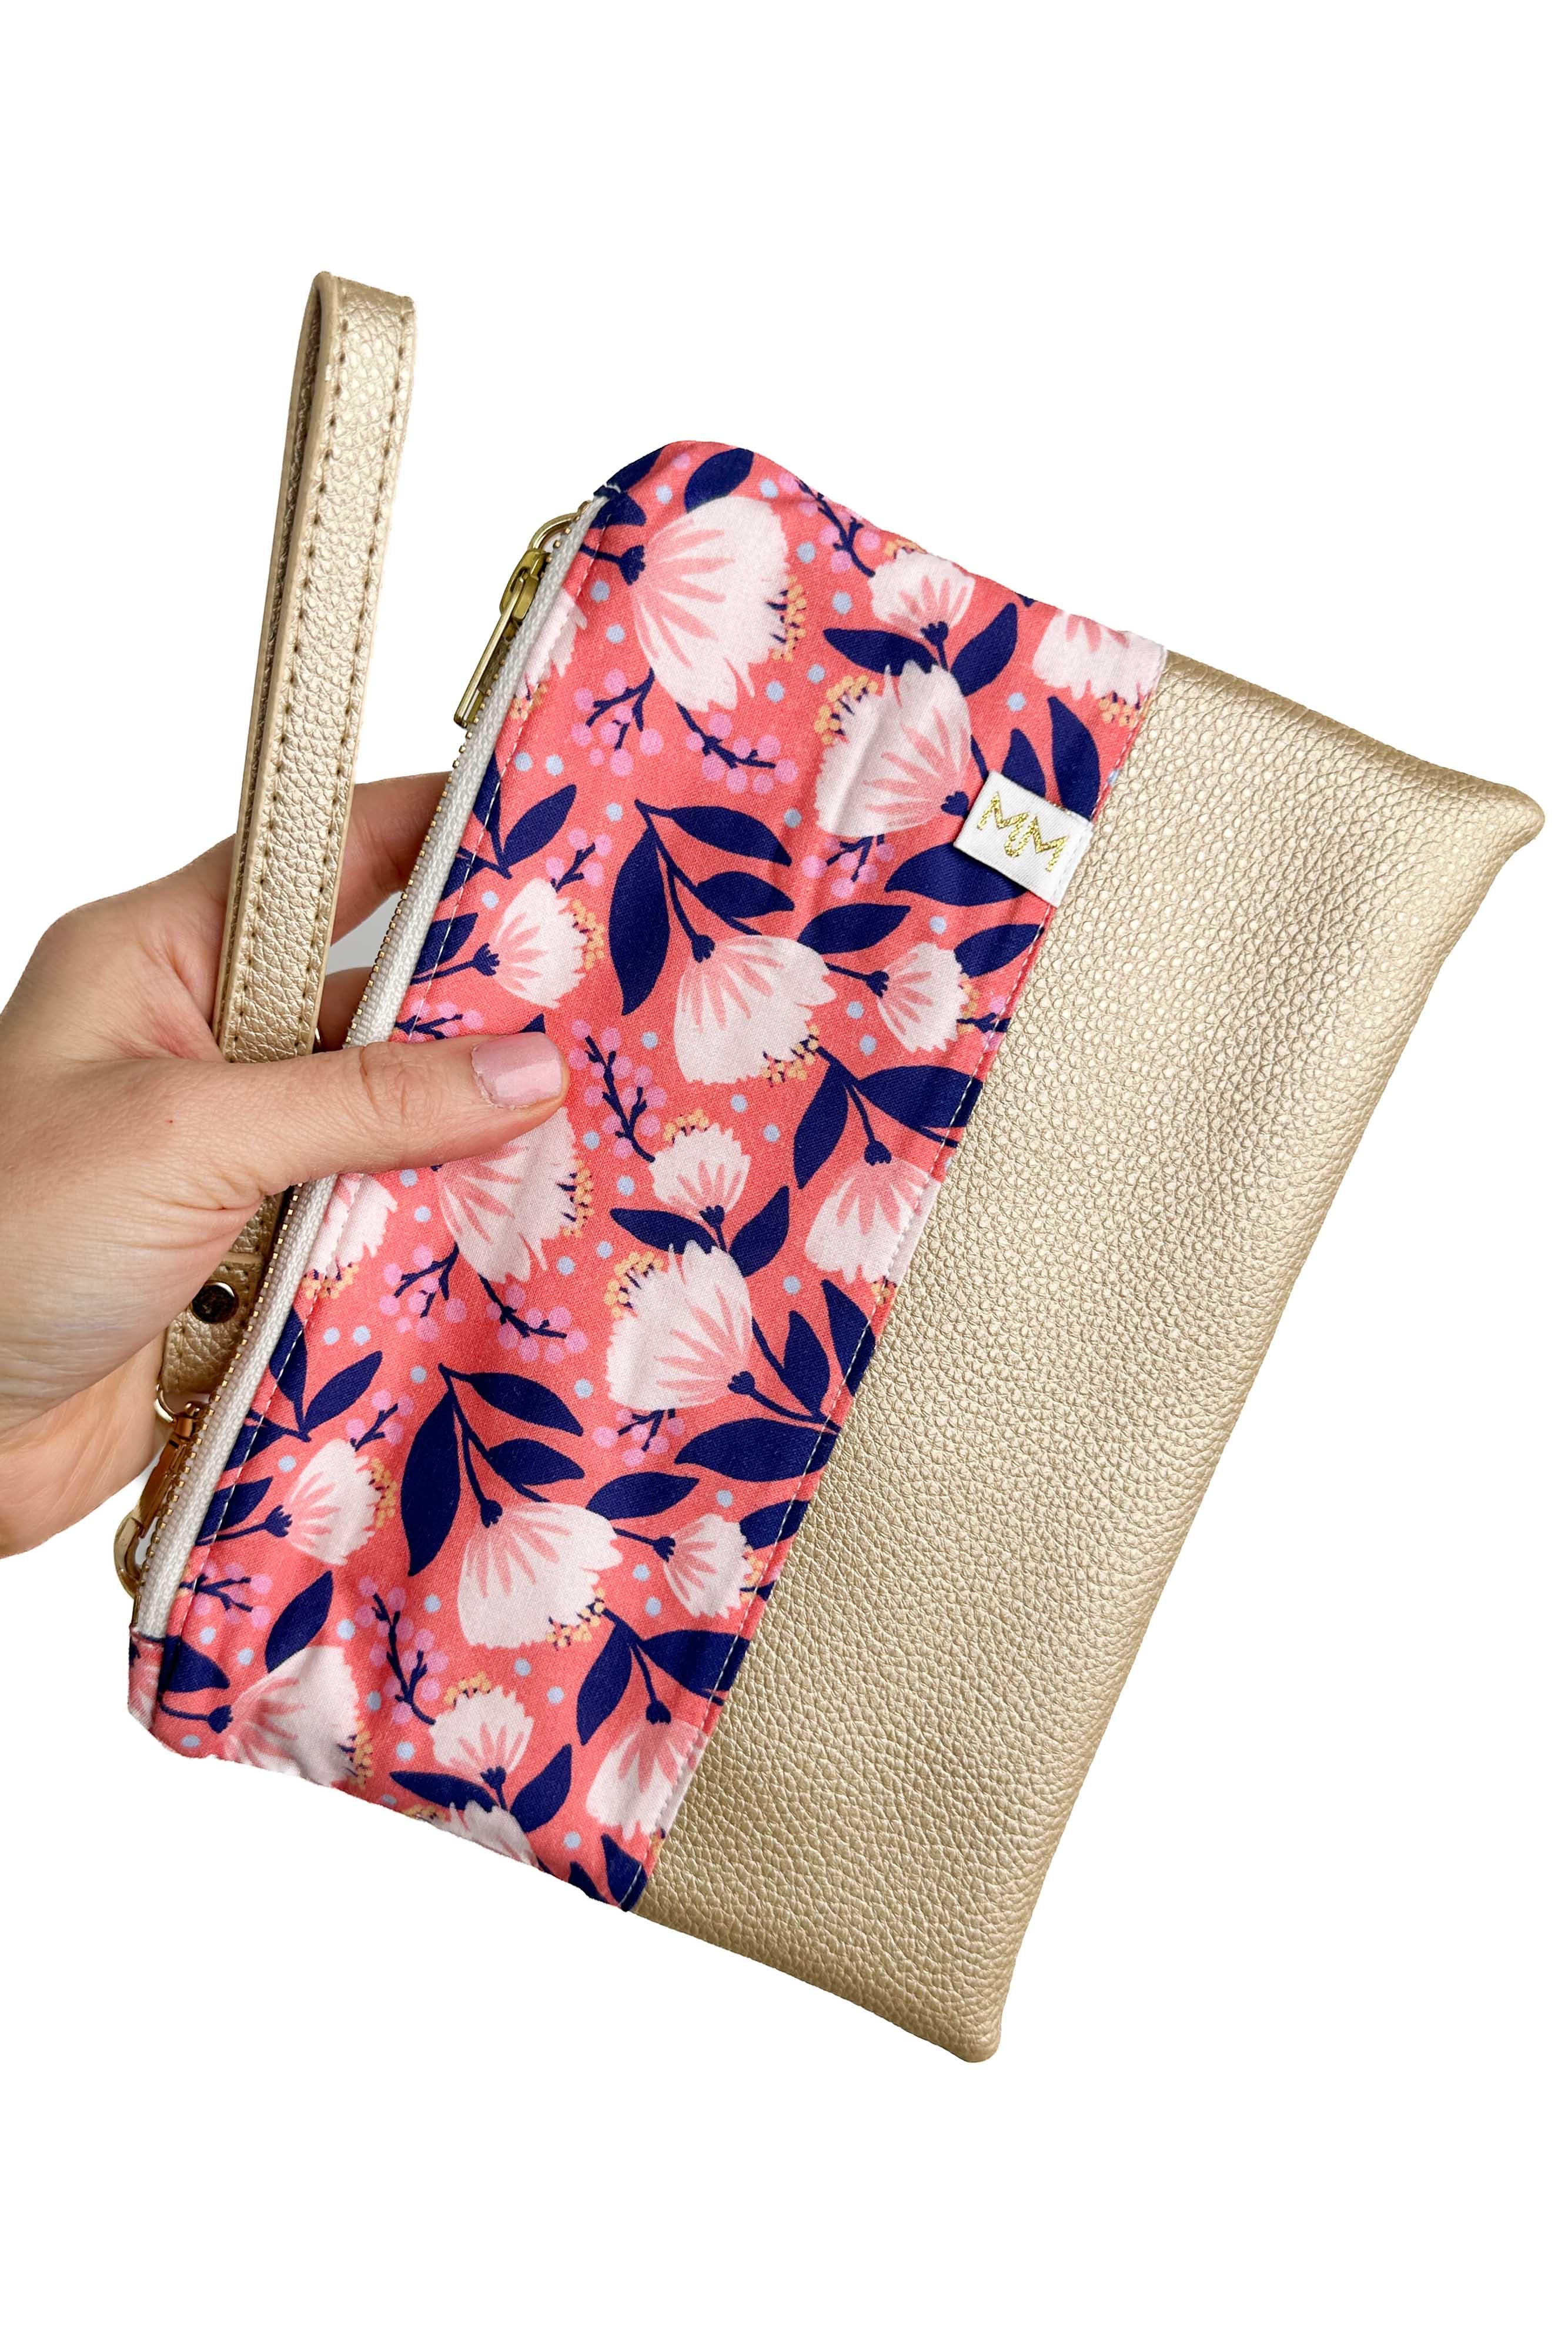 Radiant Coral Convertible Crossbody Wristlet+ with Compartments READY TO SHIP - Modern Makerie